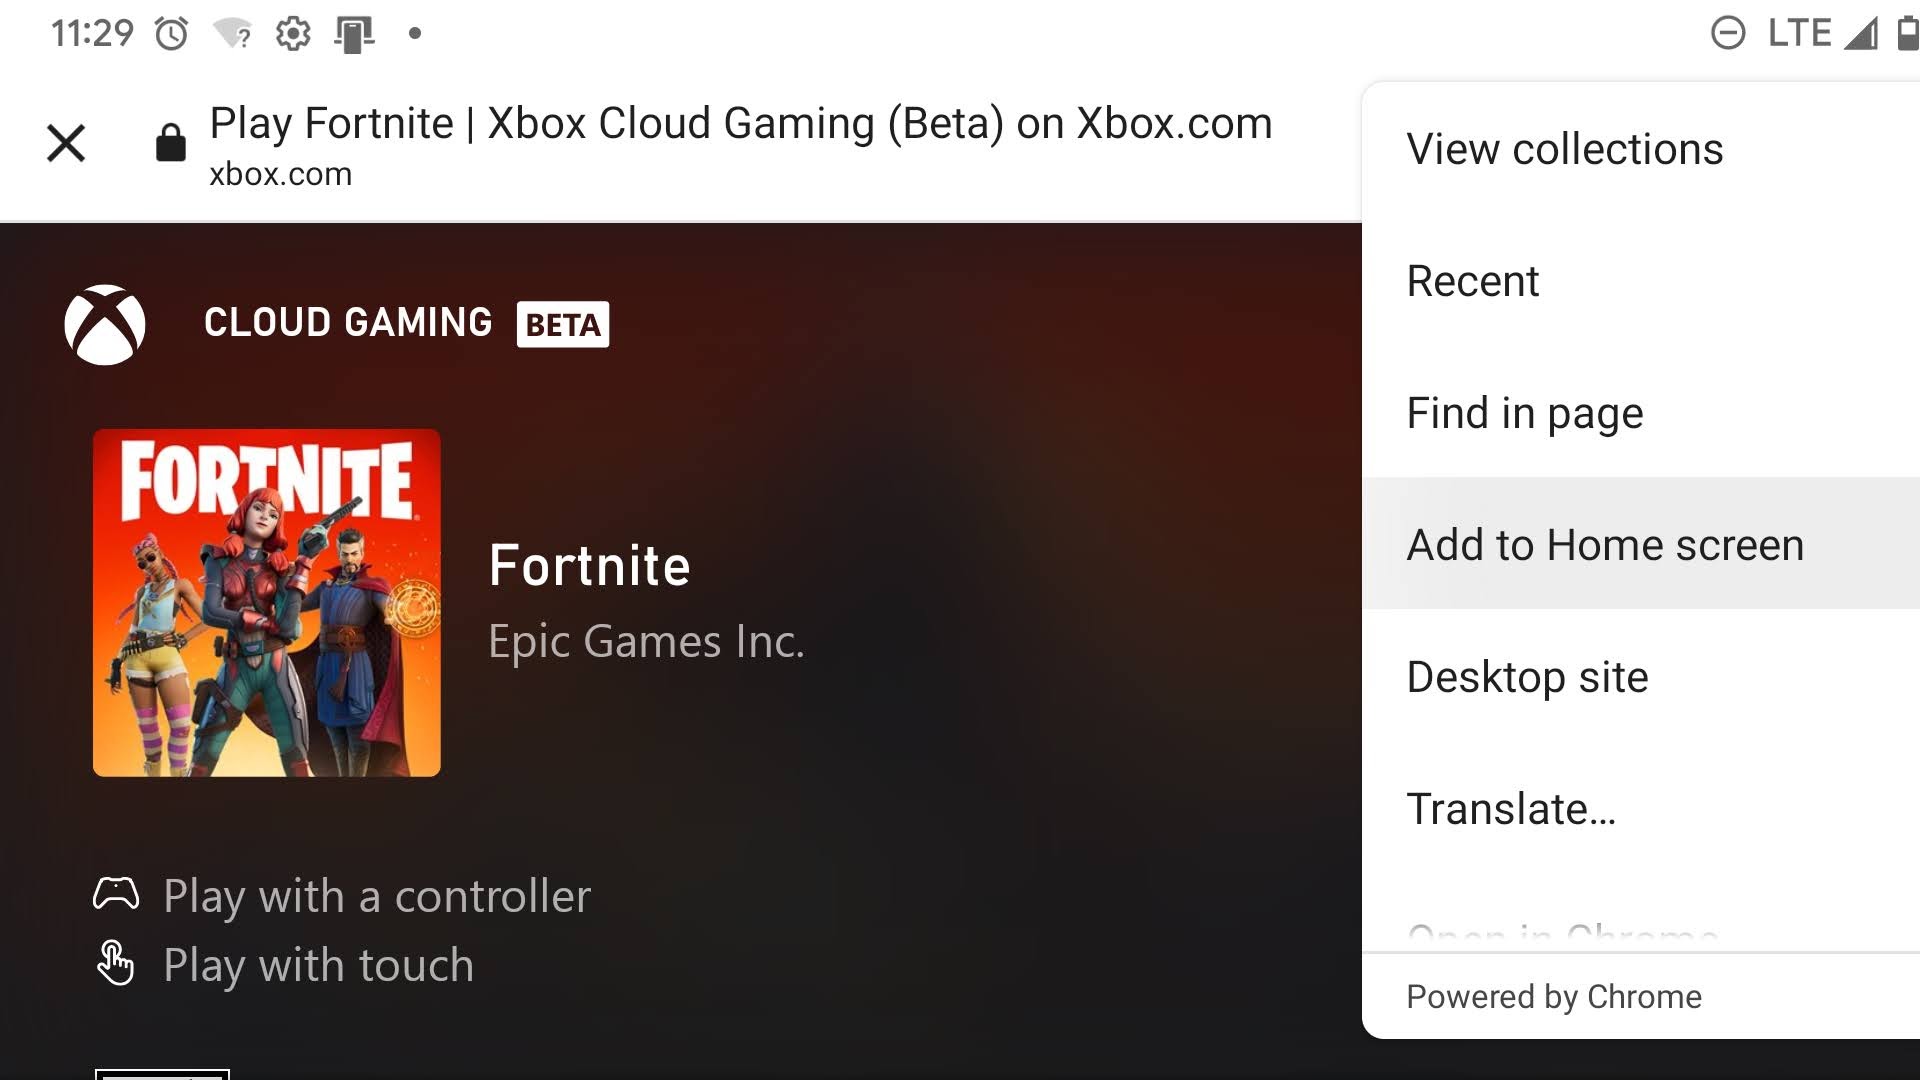 Added Fortnite and Xbox Cloud games to the home screen